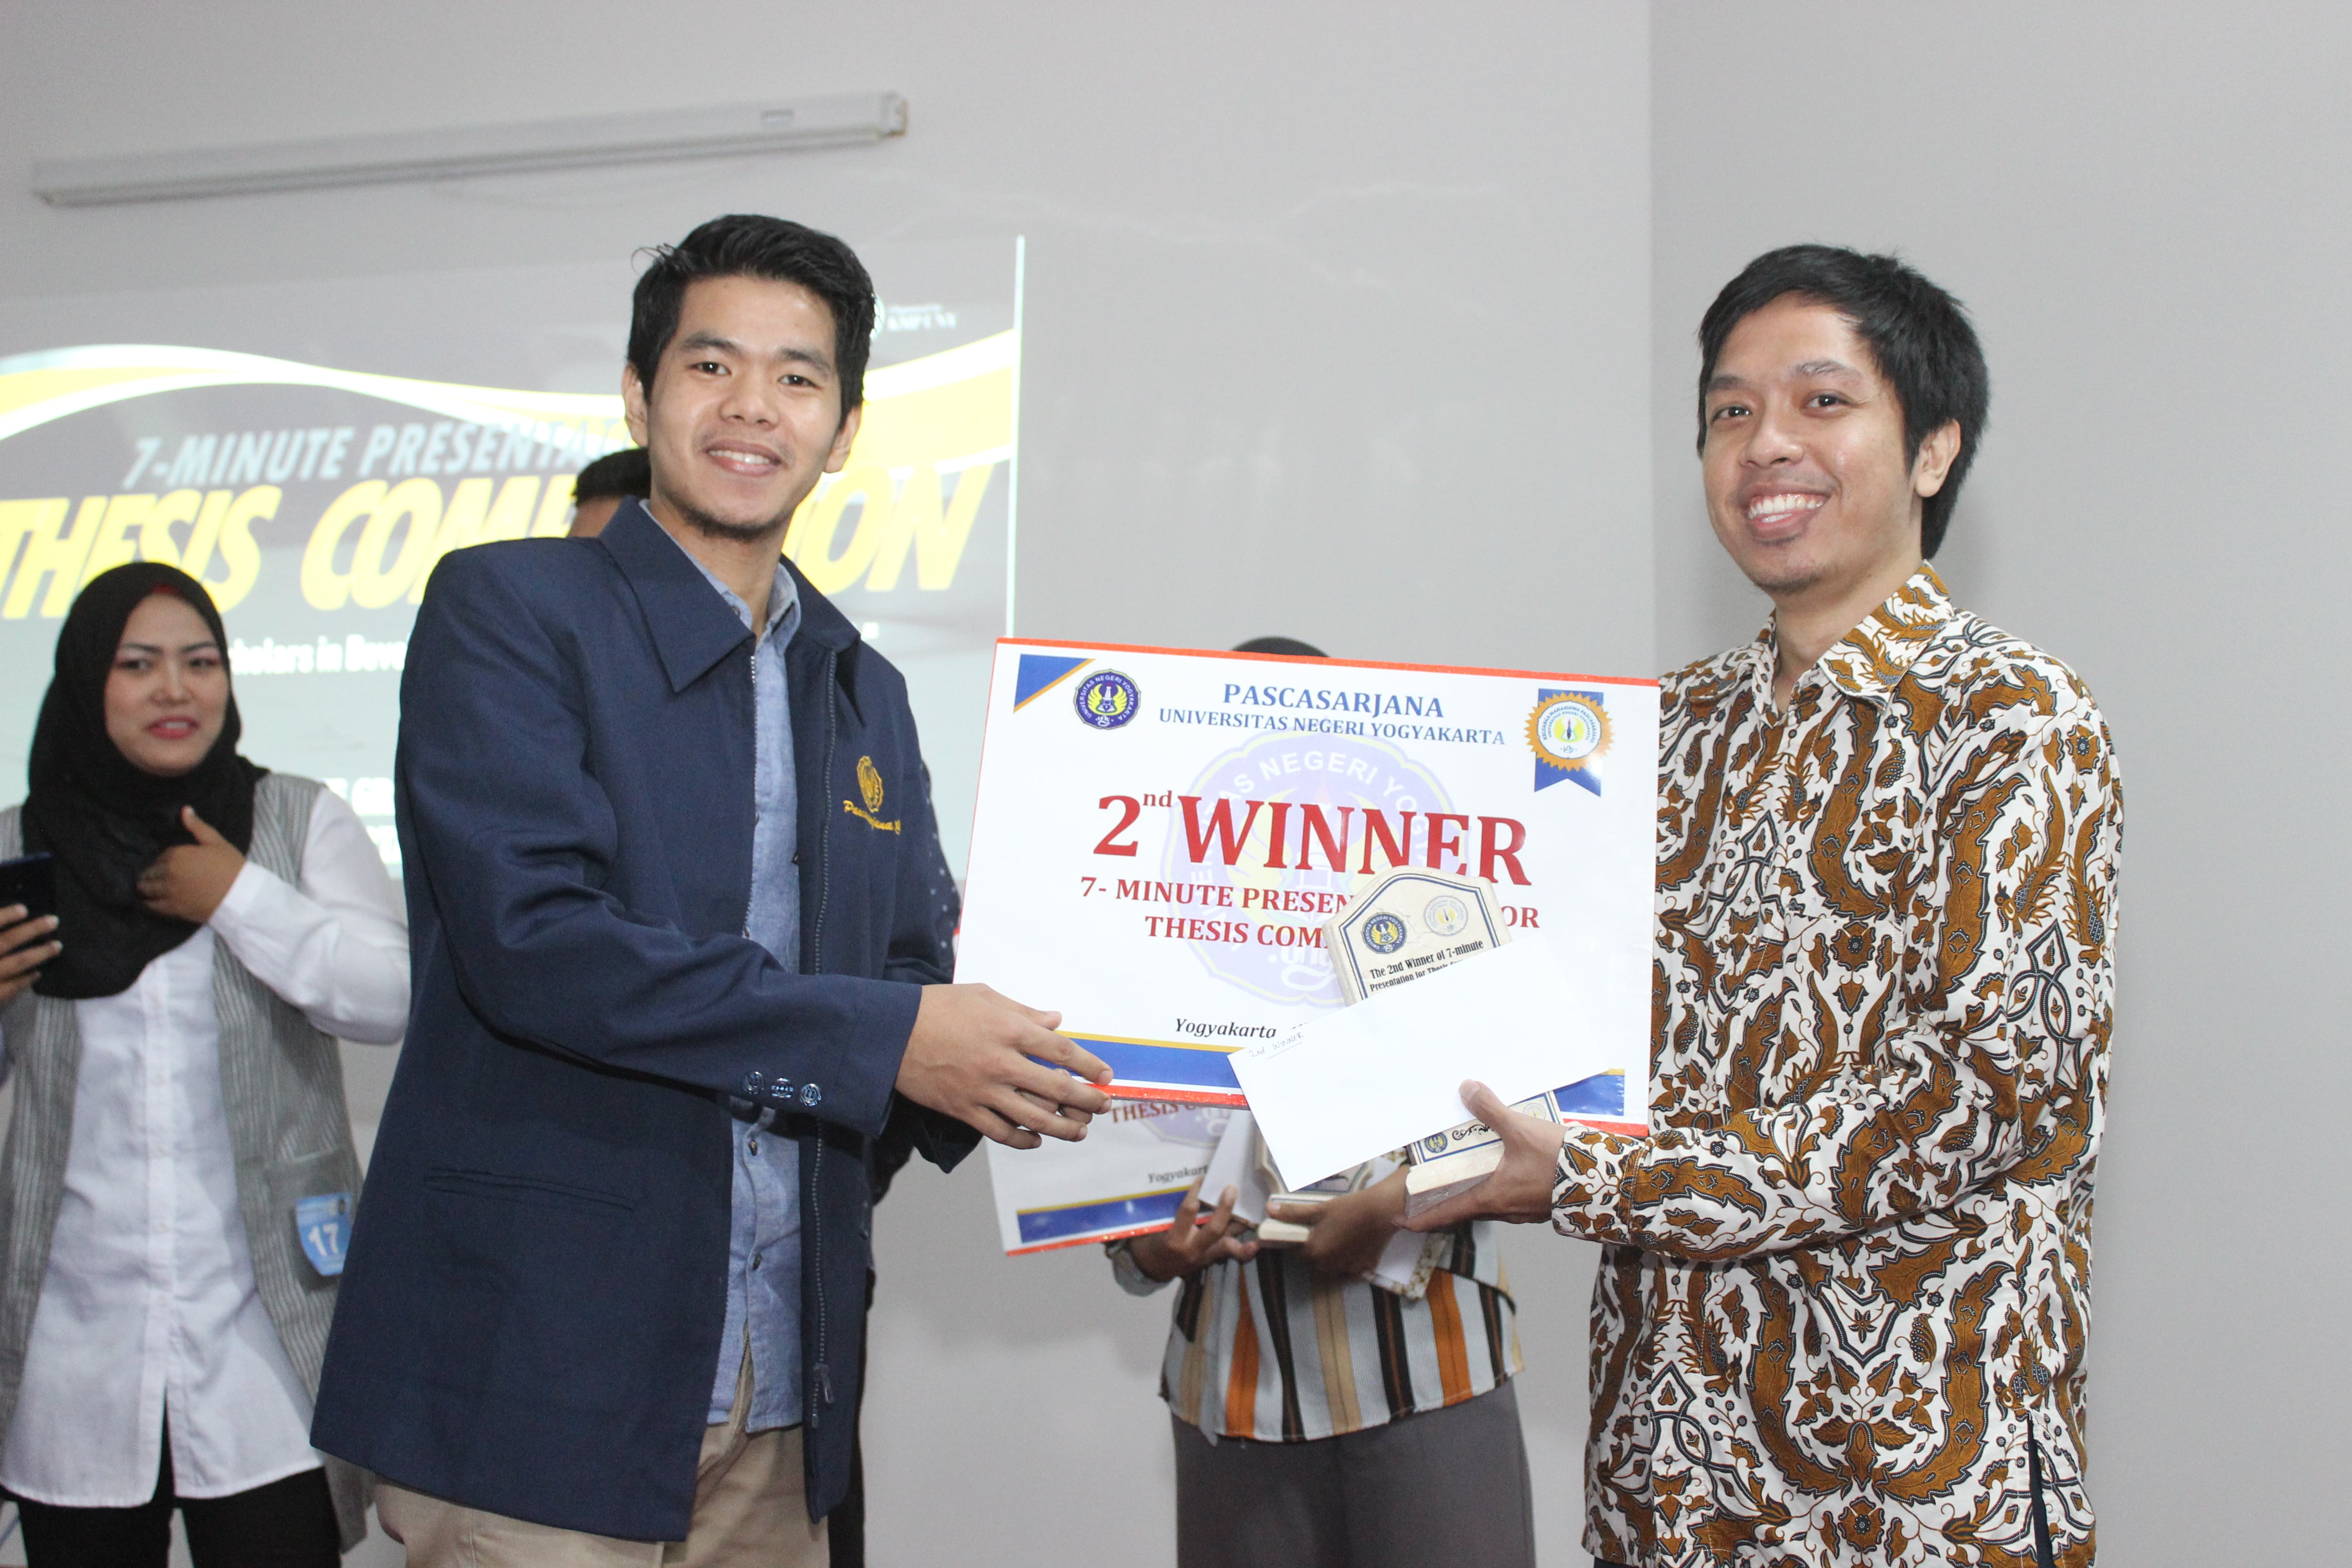 Foto Lomba Tesis 7 Menit (7-Minute Presentation For Thesis Competition)